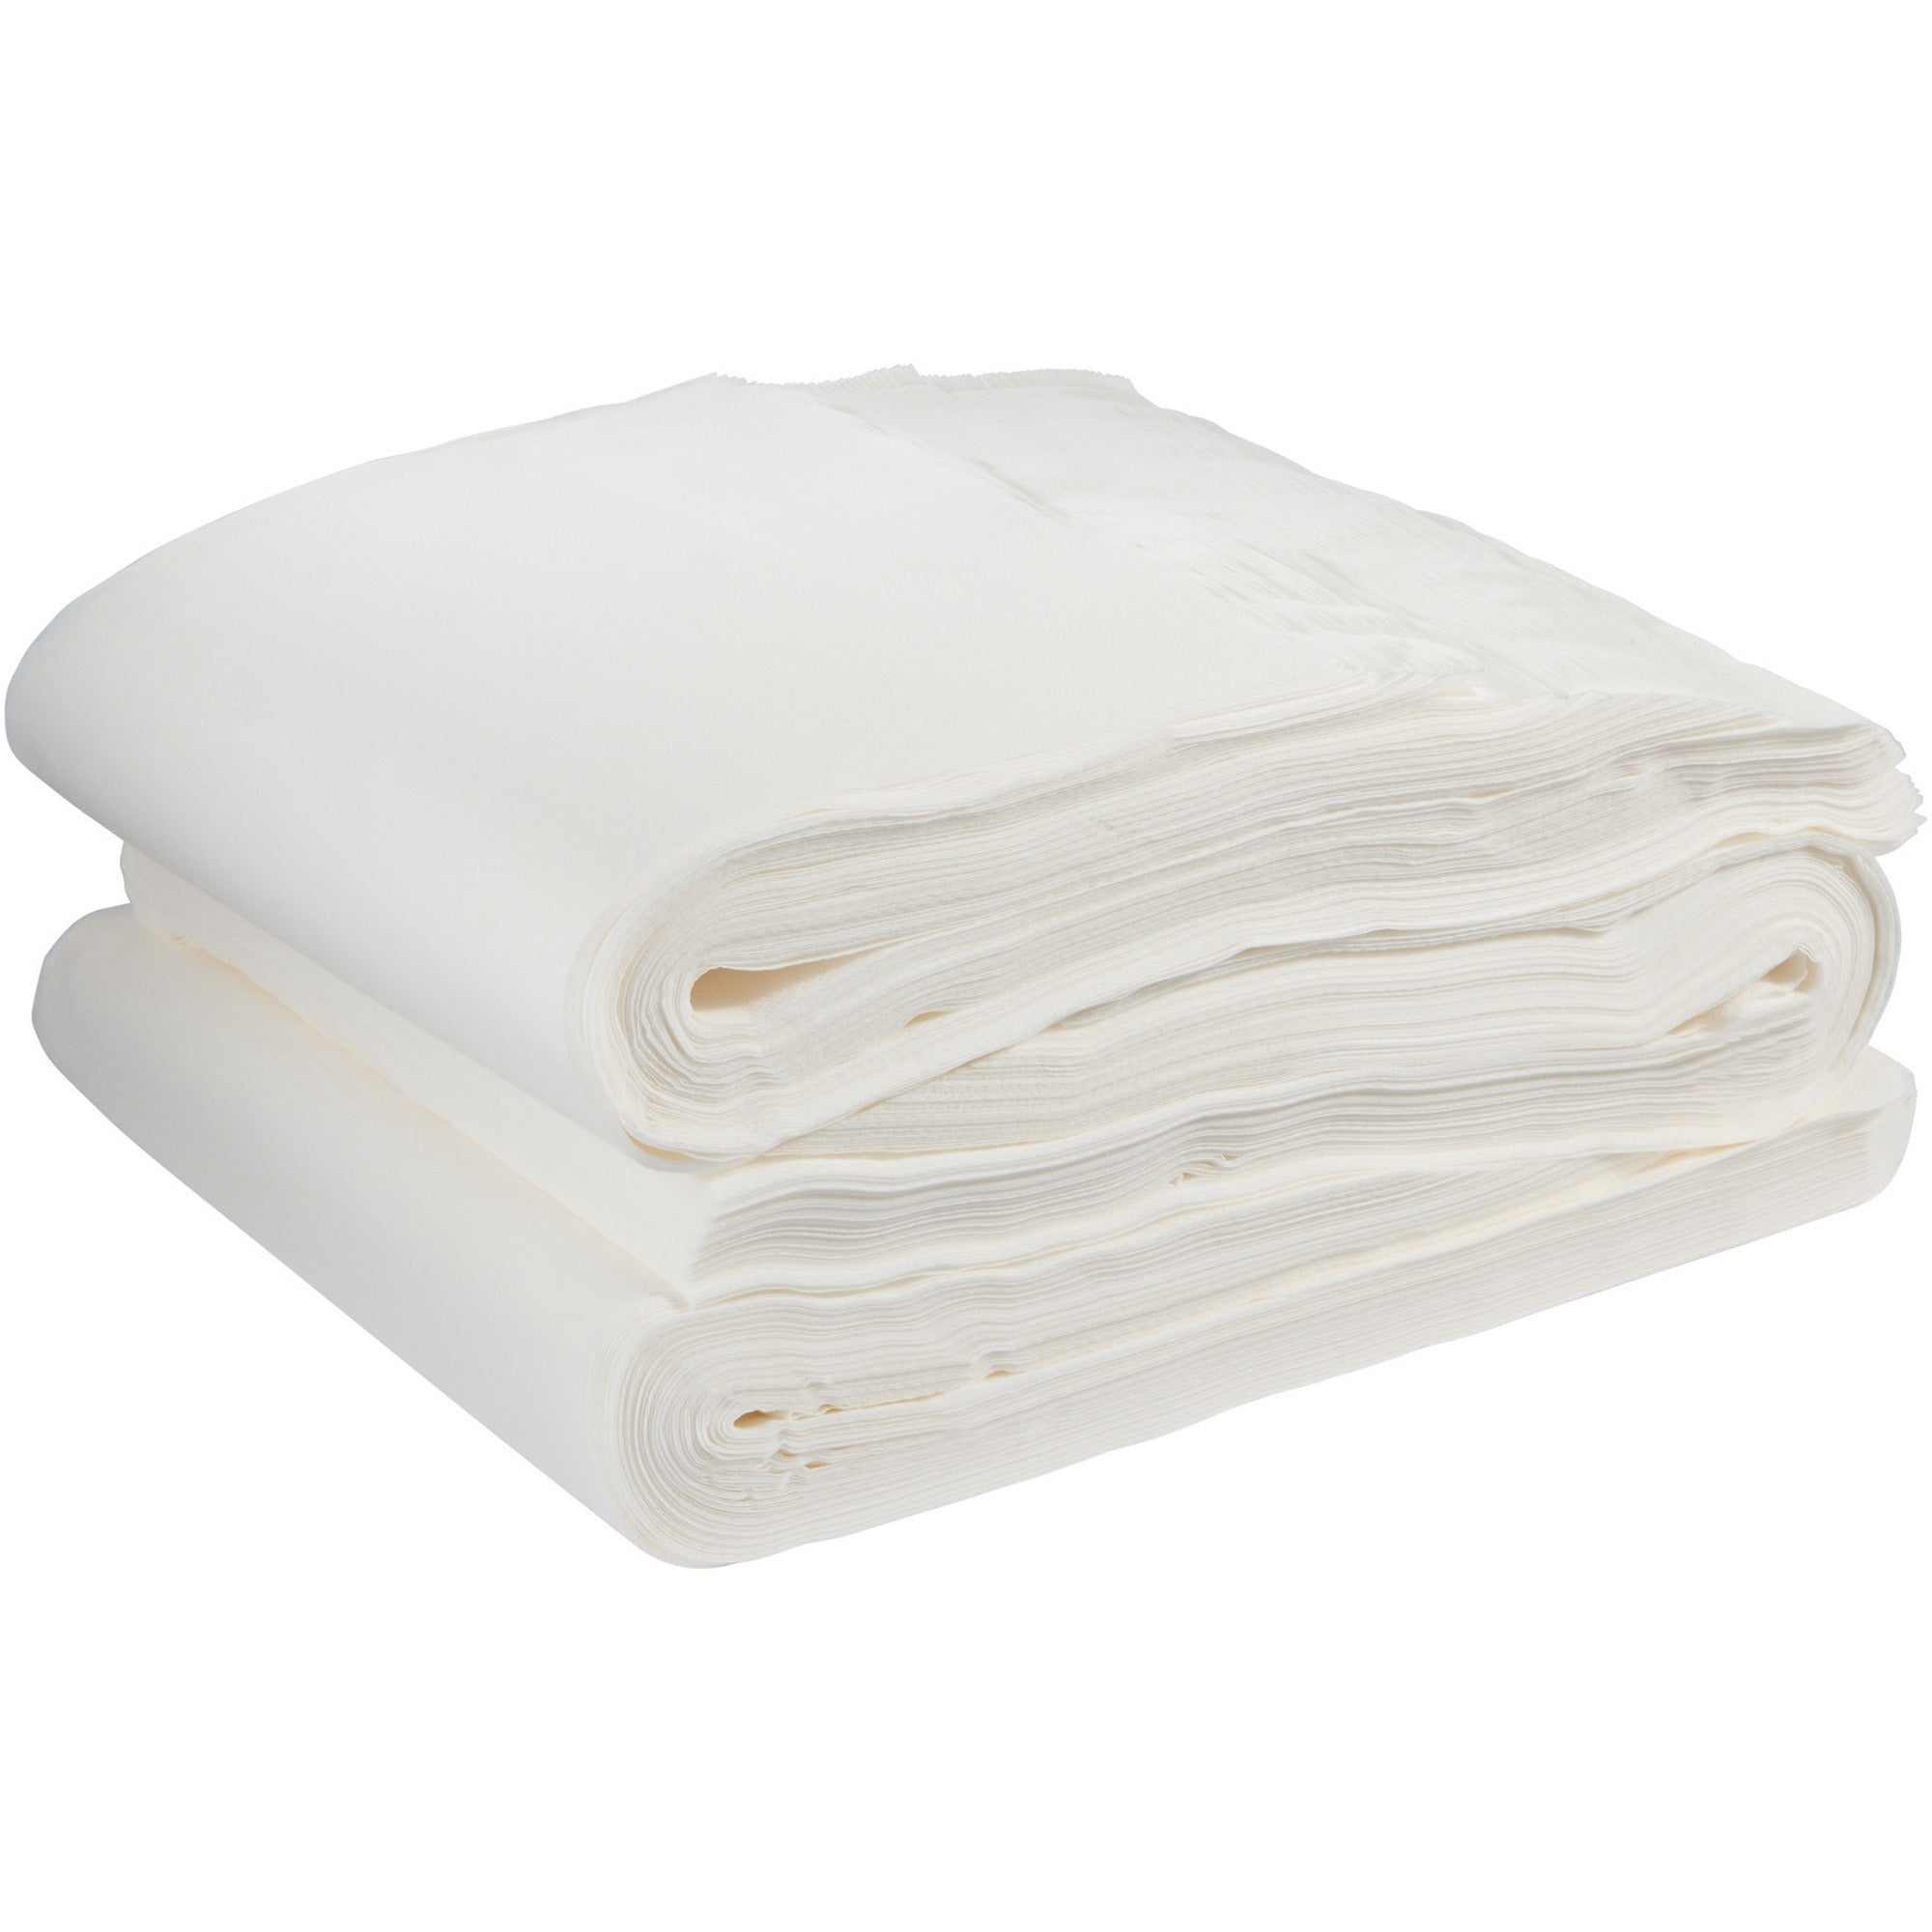 pacific-blue-select-a300-patient-care-disposable-bath-towels-1-2-fold-1950-x-39-white-cellulose-disposable-absorbent-durable-comfortable-soft-for-bathroom-hand-body-face-200-carton_gpc80540 - 1